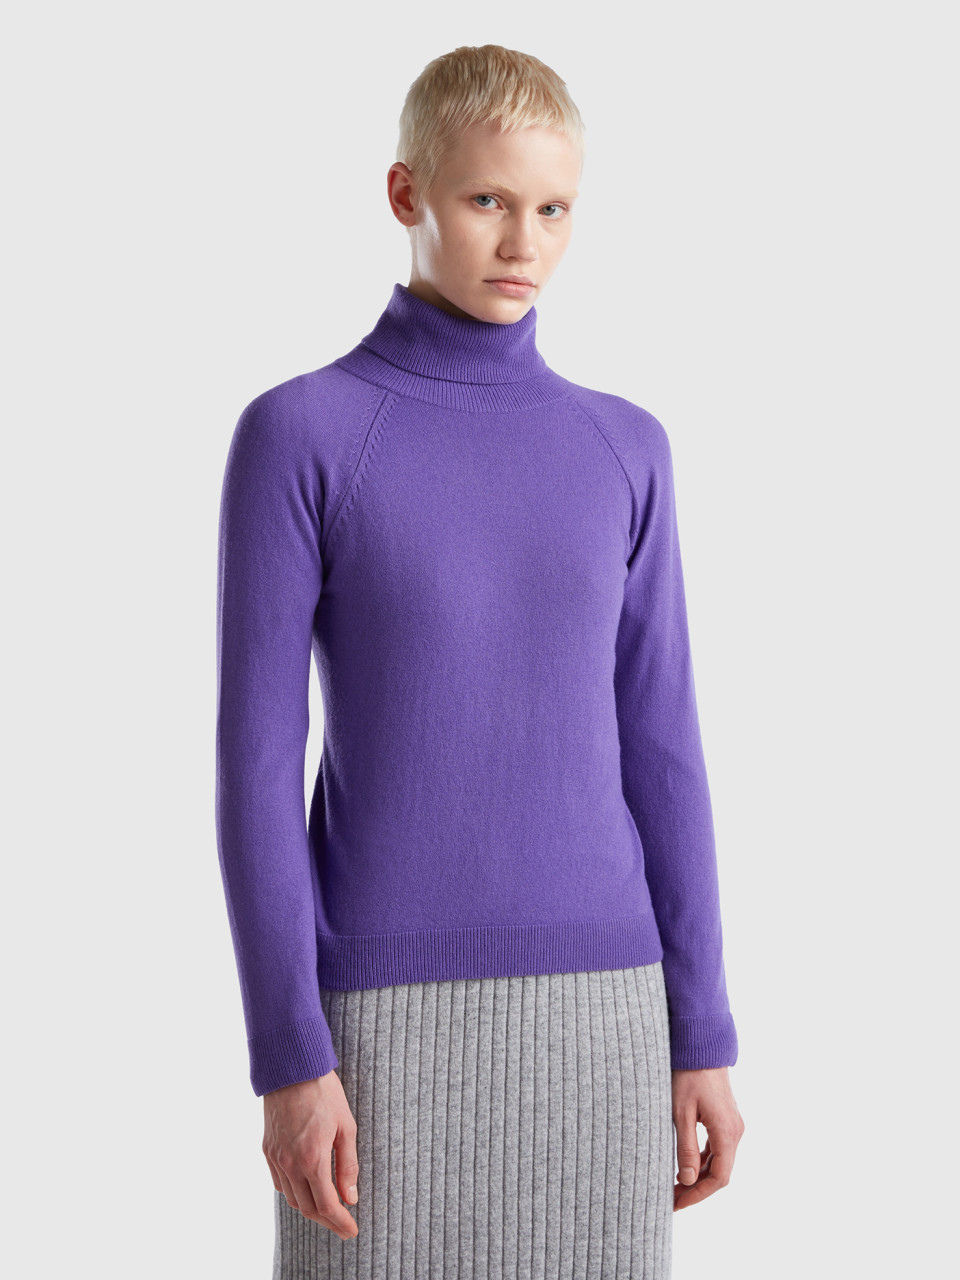 Benetton, Purple Turtleneck In Cashmere And Wool Blend, Violet, Women